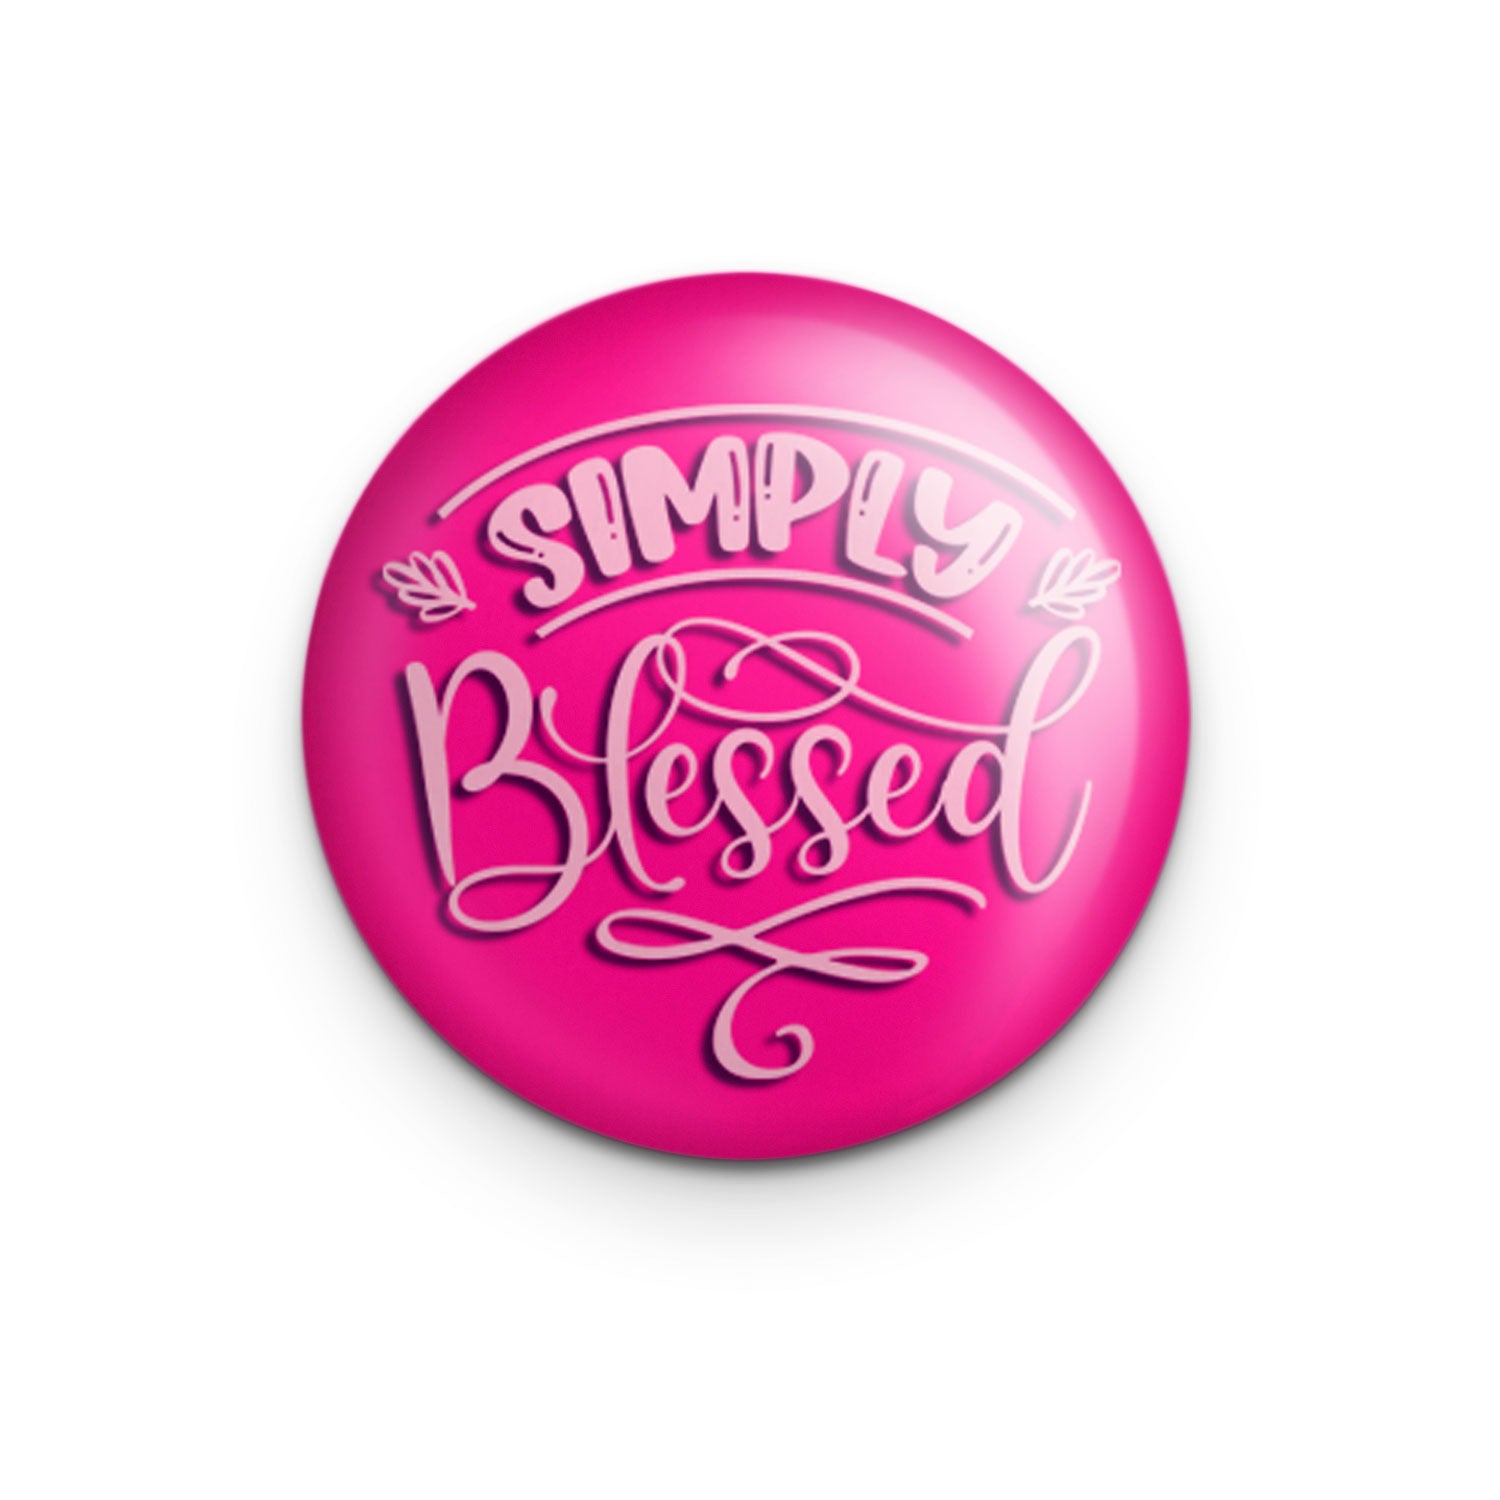 "Simply Blessed" - 1" Round Pinback Button